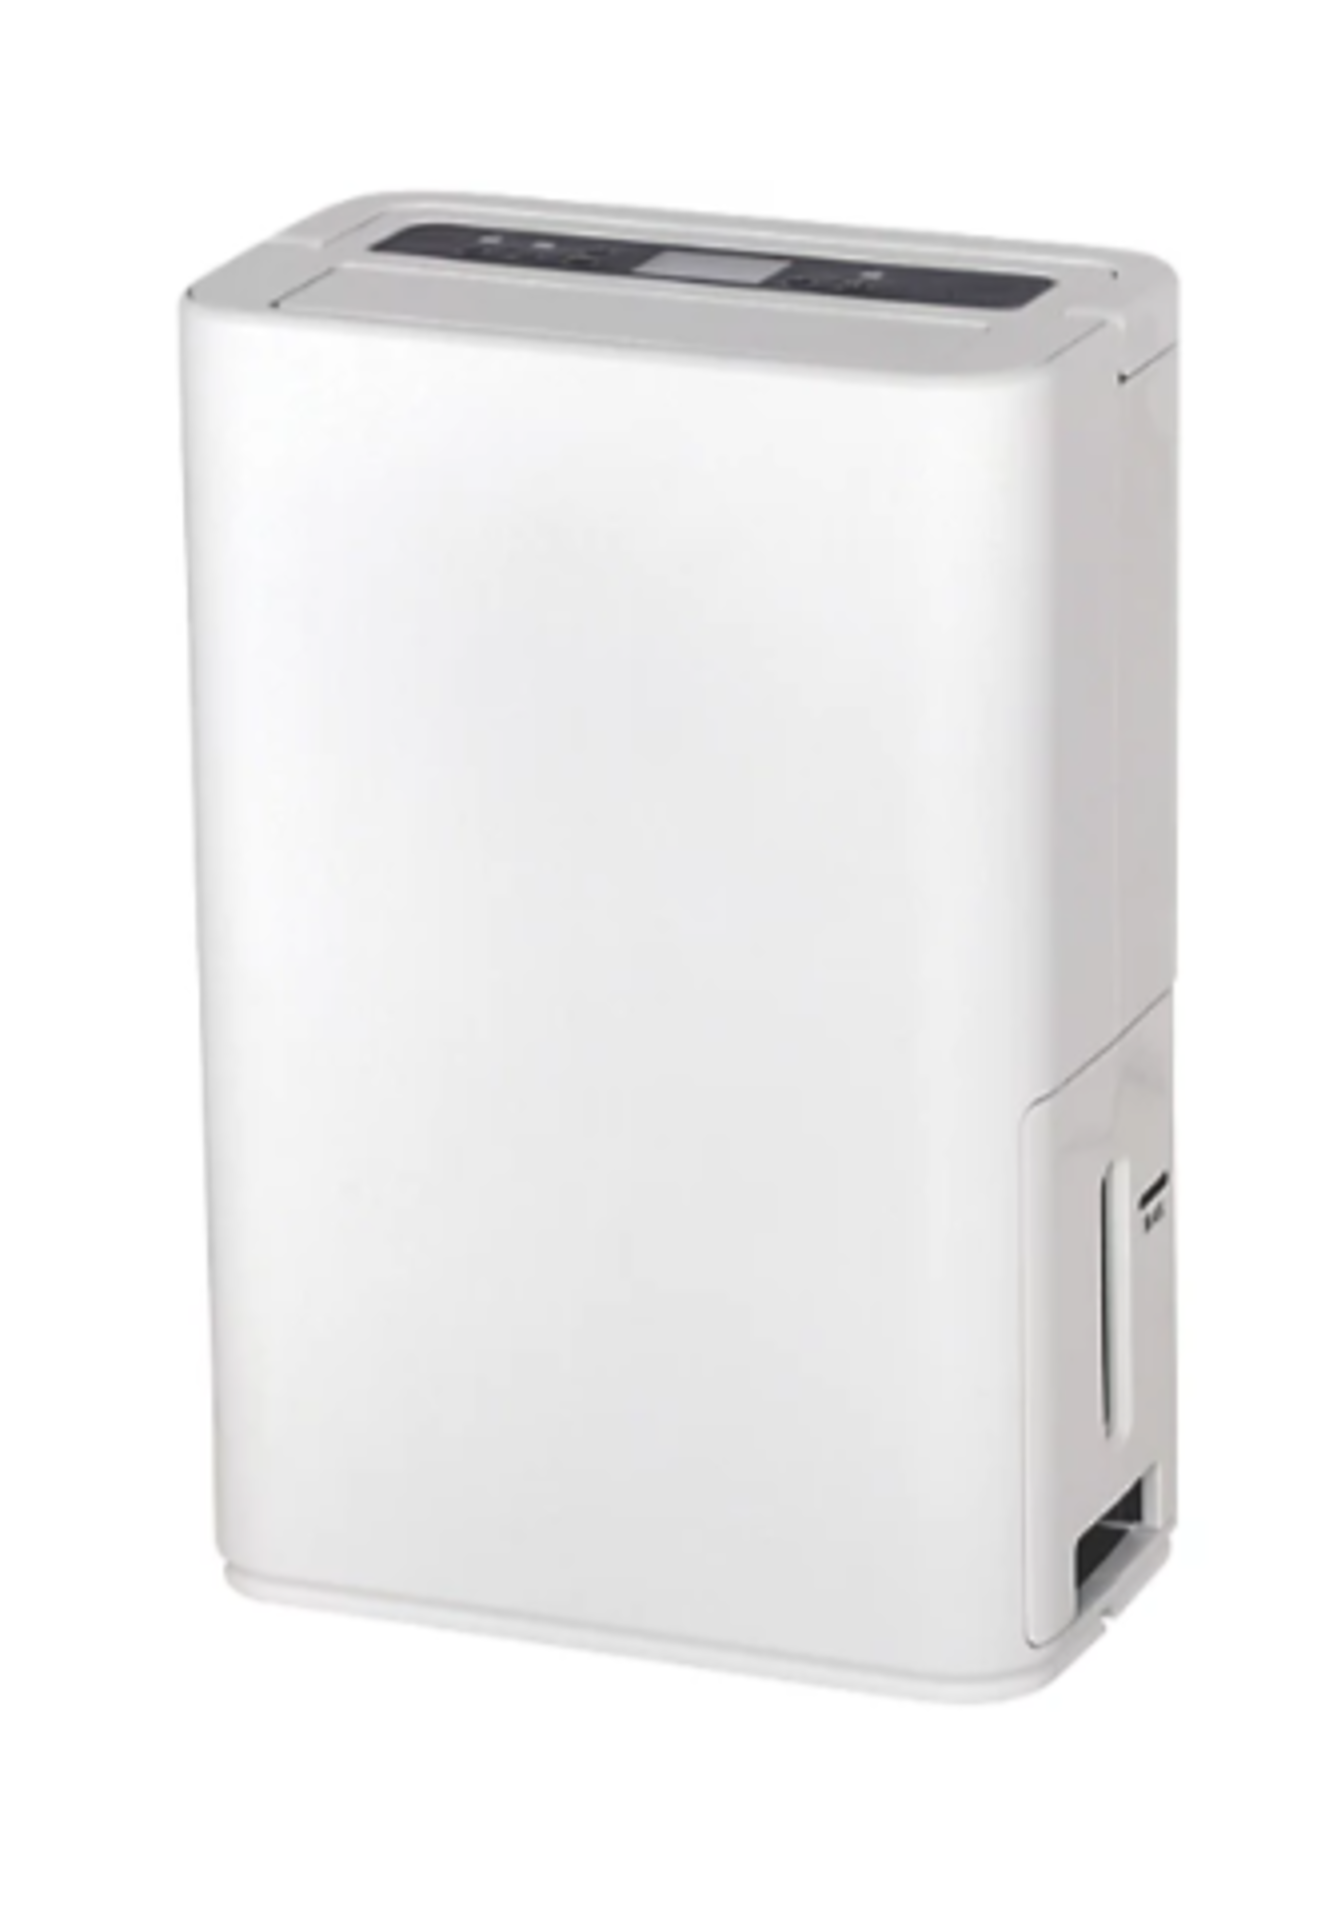 Pallet To Contain 20 x Blyss 16L Dehumidifier. RRP £190 each. This Blyss Excellence 16L Dehumidifier